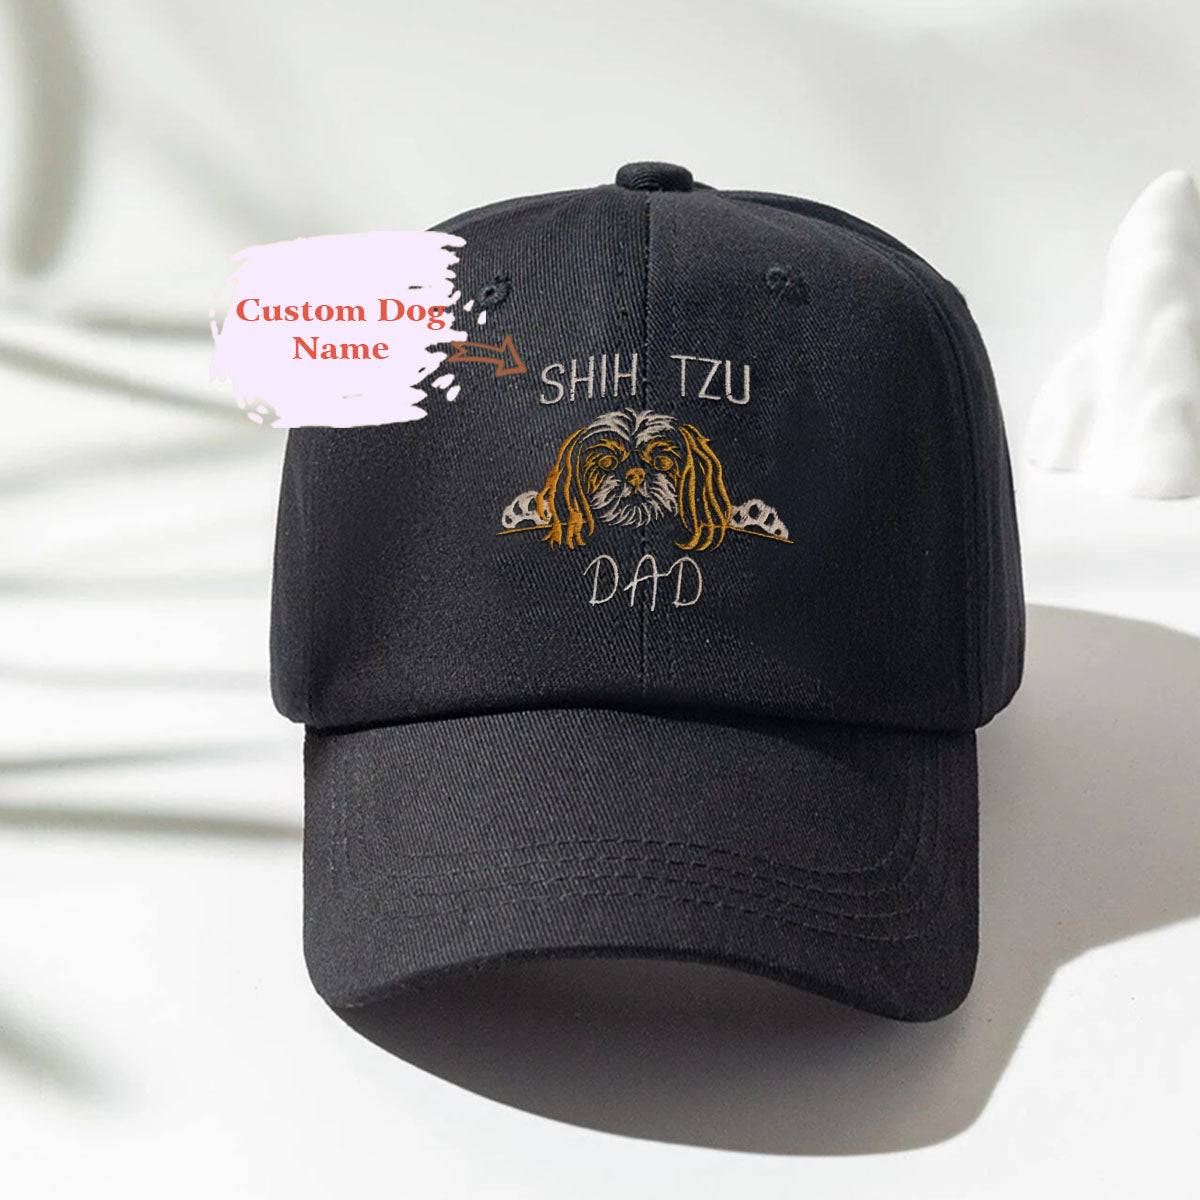 Custom Shih Tzu Dog Dad Embroidered Hat, Personalized Hat with Dog Name, Best Gifts For Shih Tzu Lovers